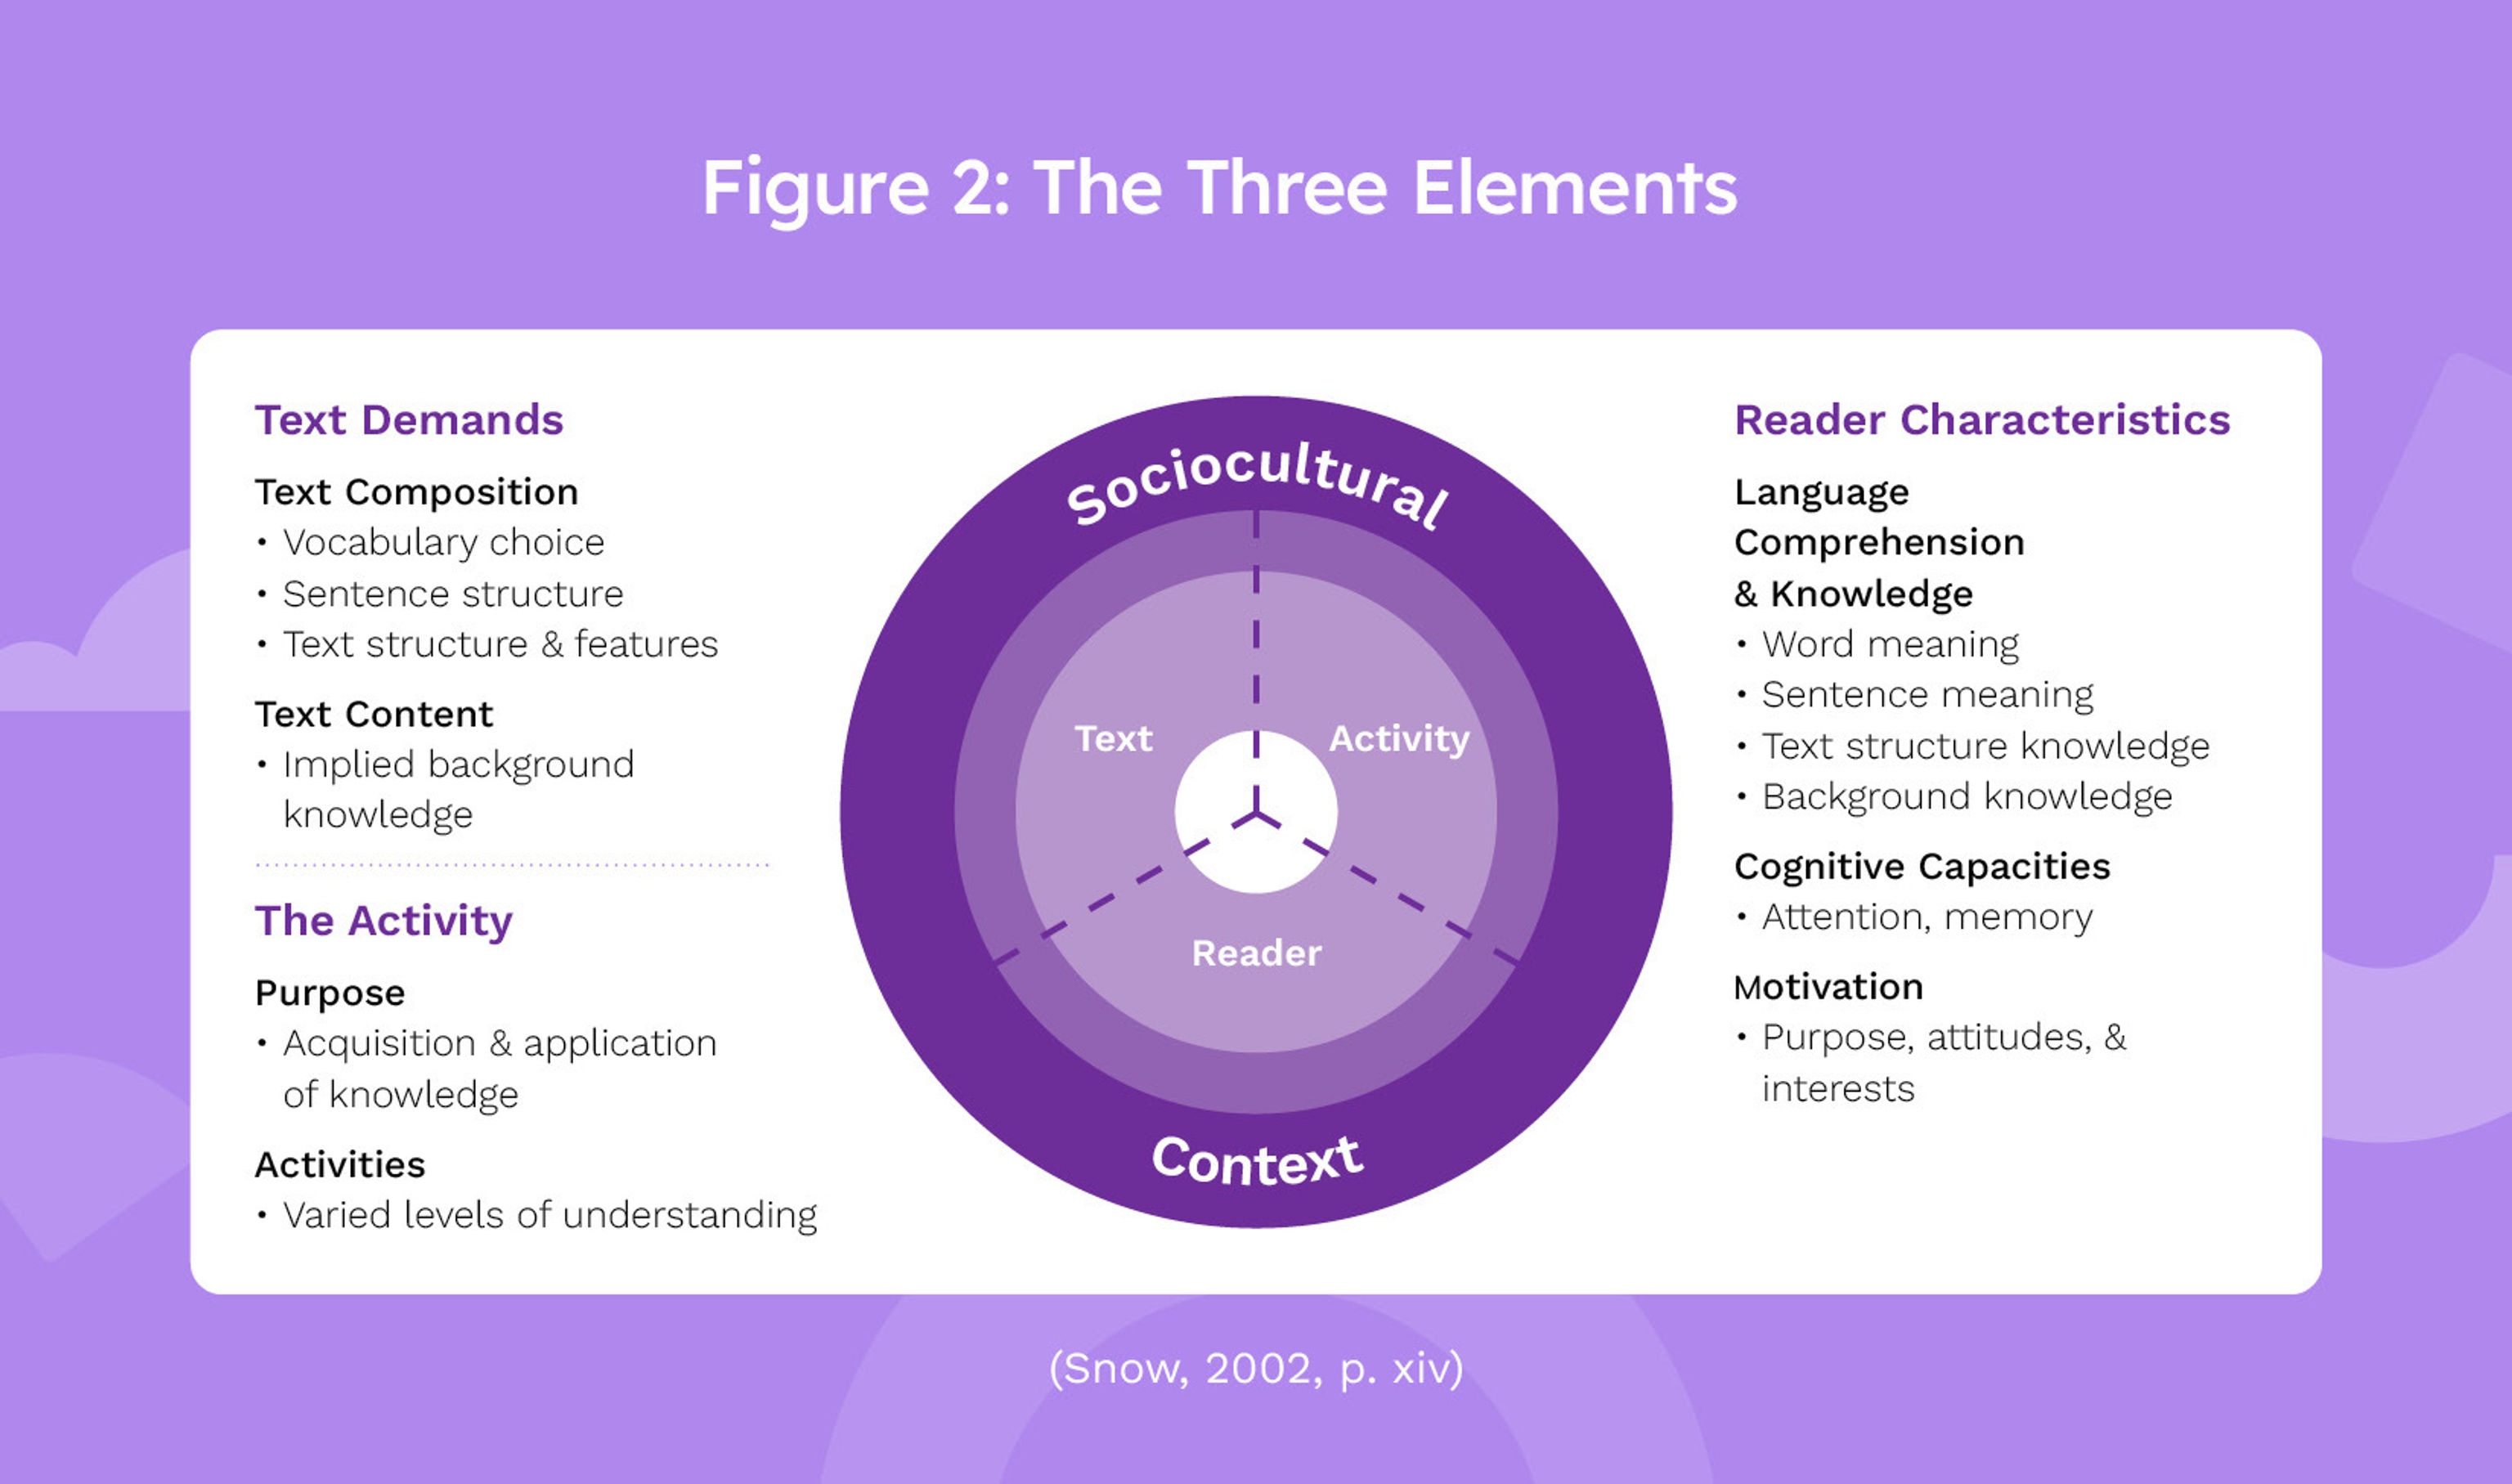 An illustration of the heuristic with the three elements explained. Element one: Text Demands (text composition with vocabulary choice, sentence structure, text structure and features) and Text Content (implied background knowledge). Element two: the activity consisting of purpose (acquisition and application of knowledge) and activities (varied levels of understanding). And element three: Reader Characteristics made up of language comprehension and knowledge (word meaning, sentence meaning, text structure knowledge), cognitive capacities (attention, memory) and motivation (purpose, attitudes, and interests).